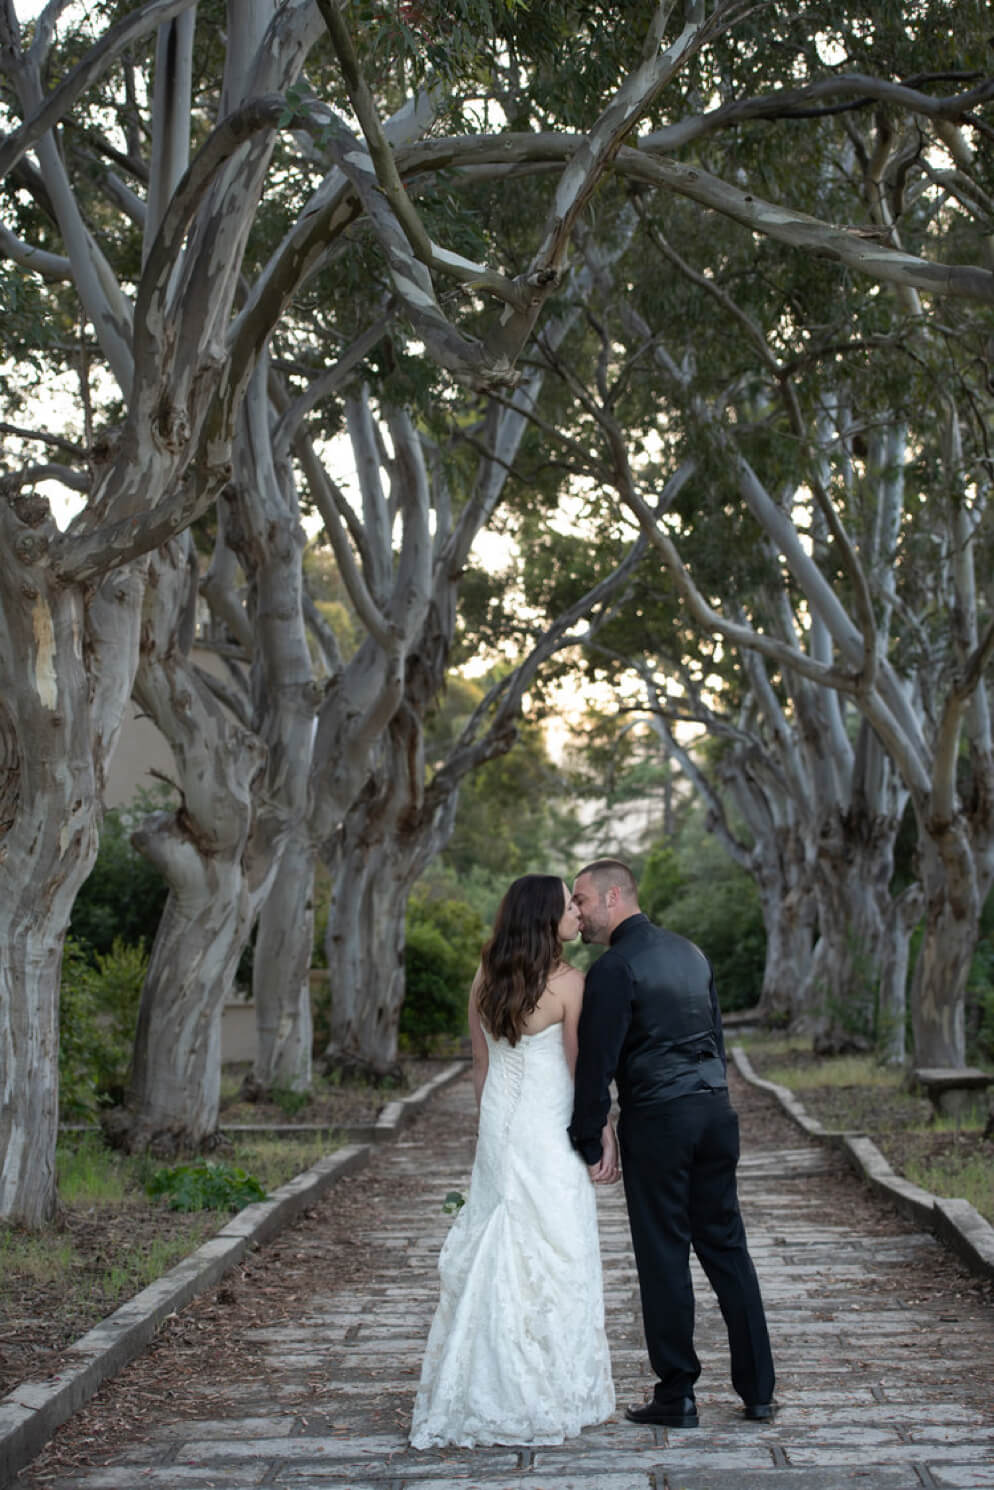 Couple kisses under trees on their wedding day.